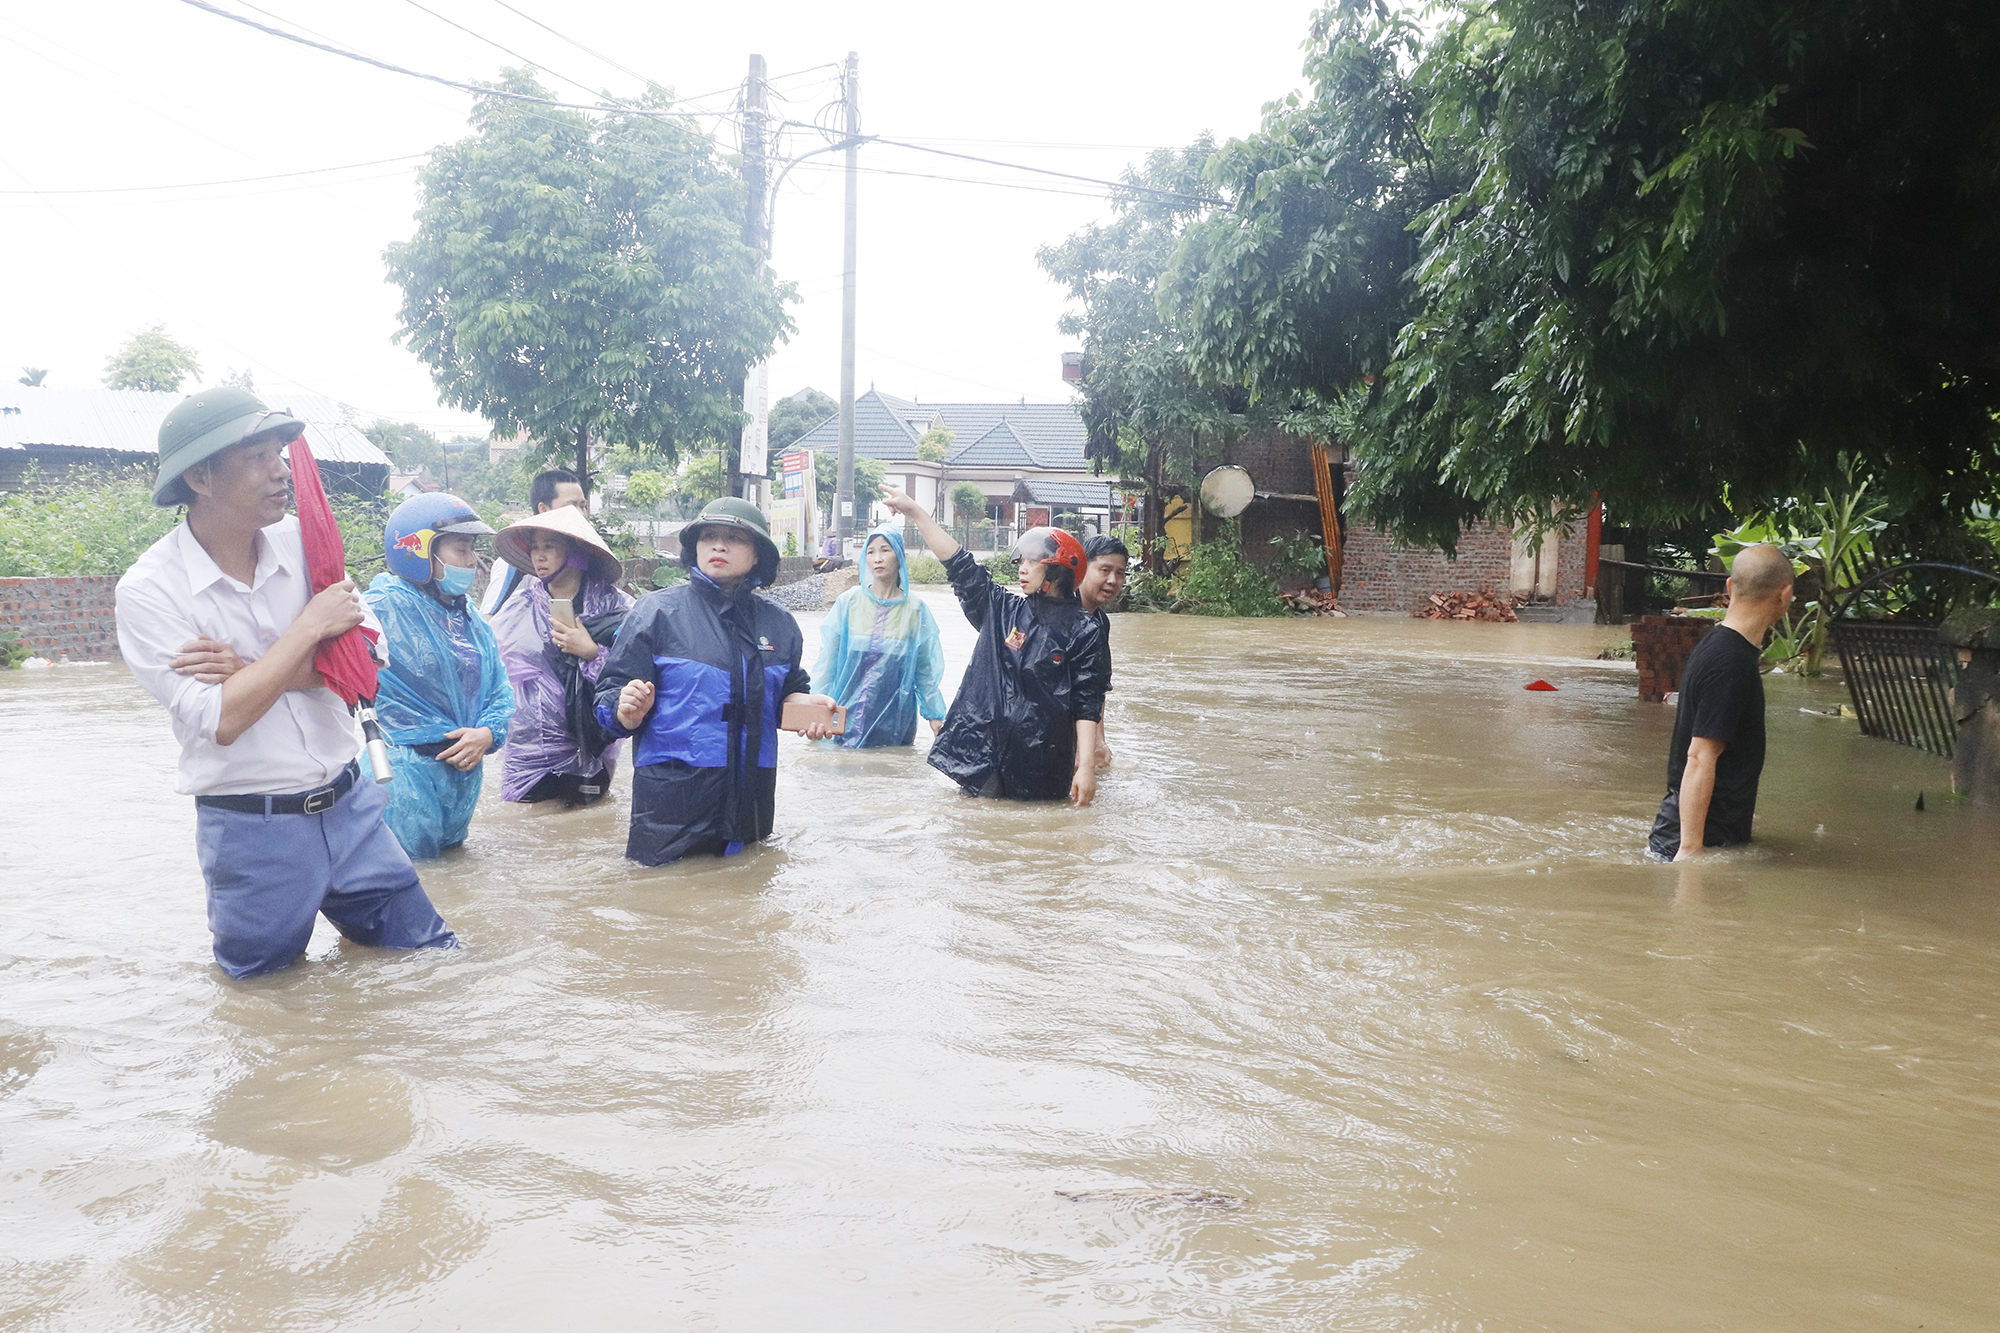 Golf course dam failure leads to flooded households in northern Vietnam